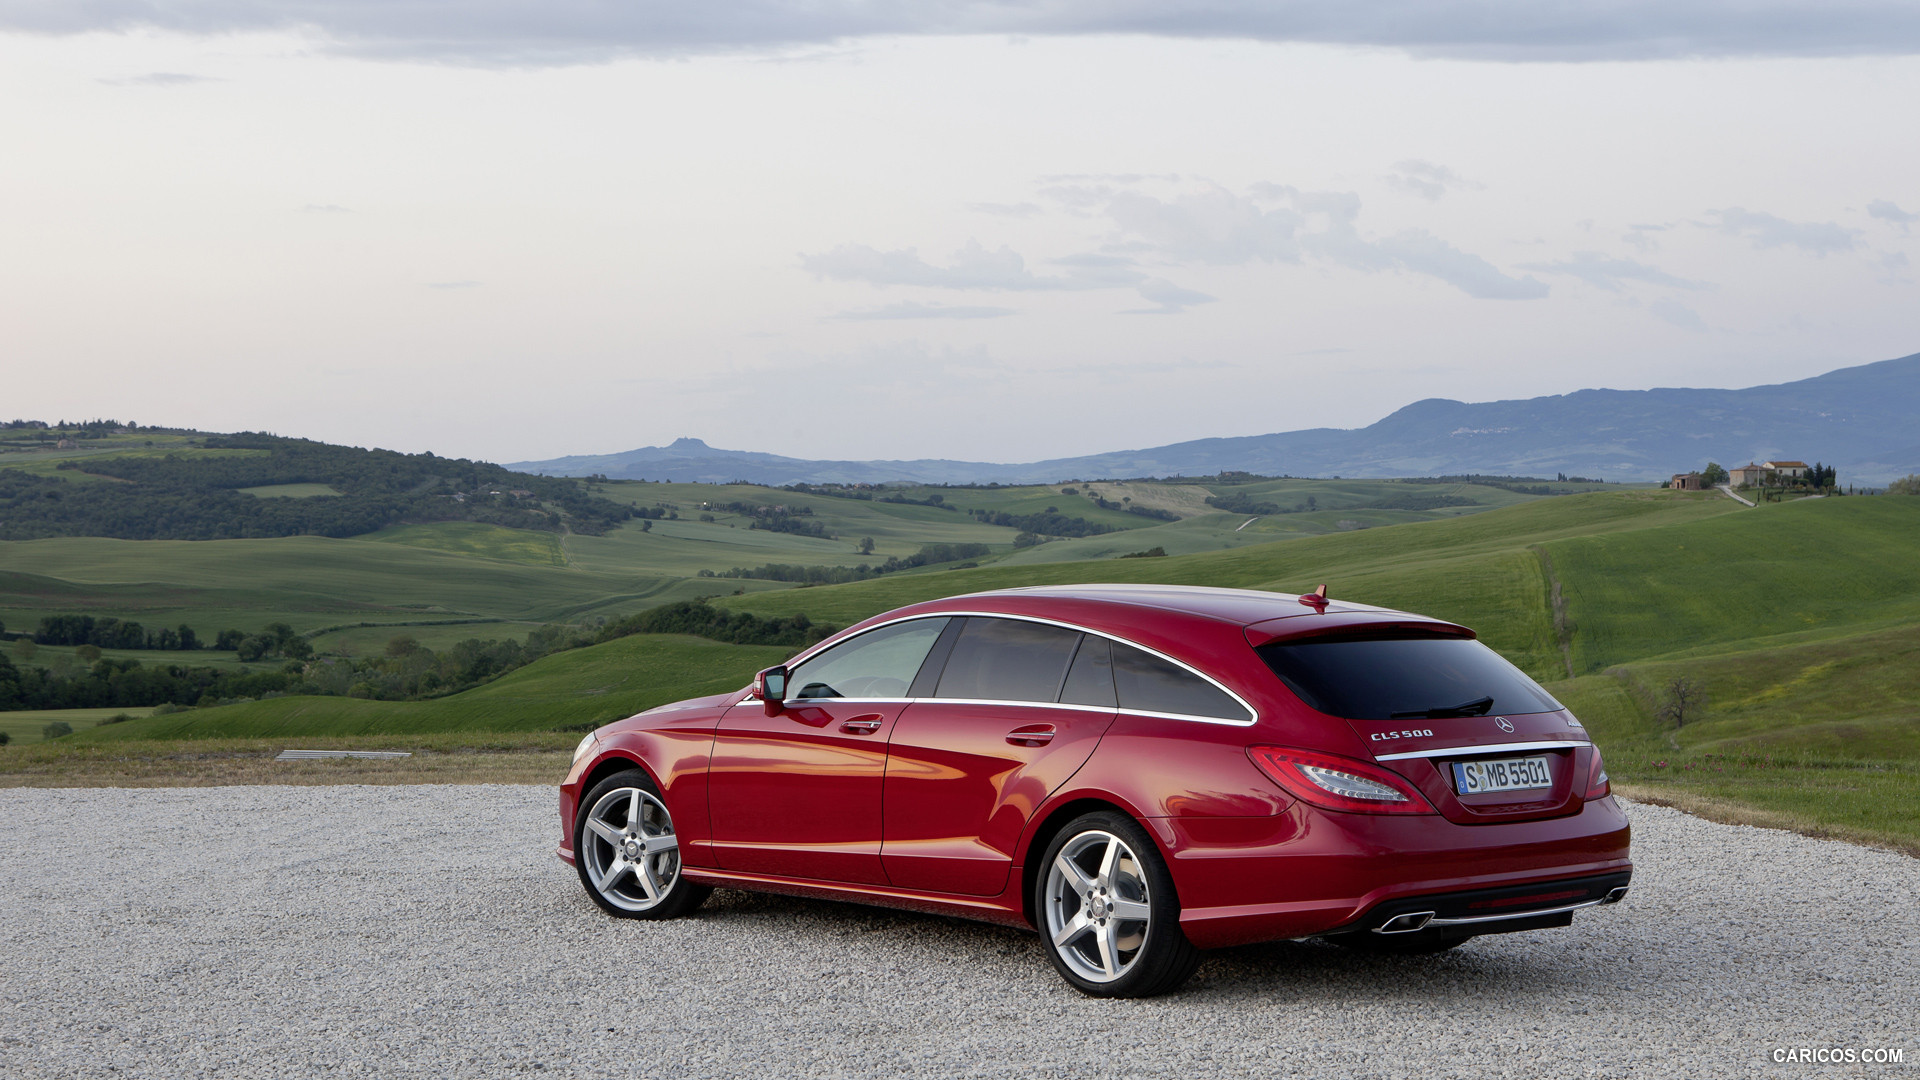 2013 Mercedes-Benz CLS 500 4MATIC Shooting Brake - Rear, #6 of 184